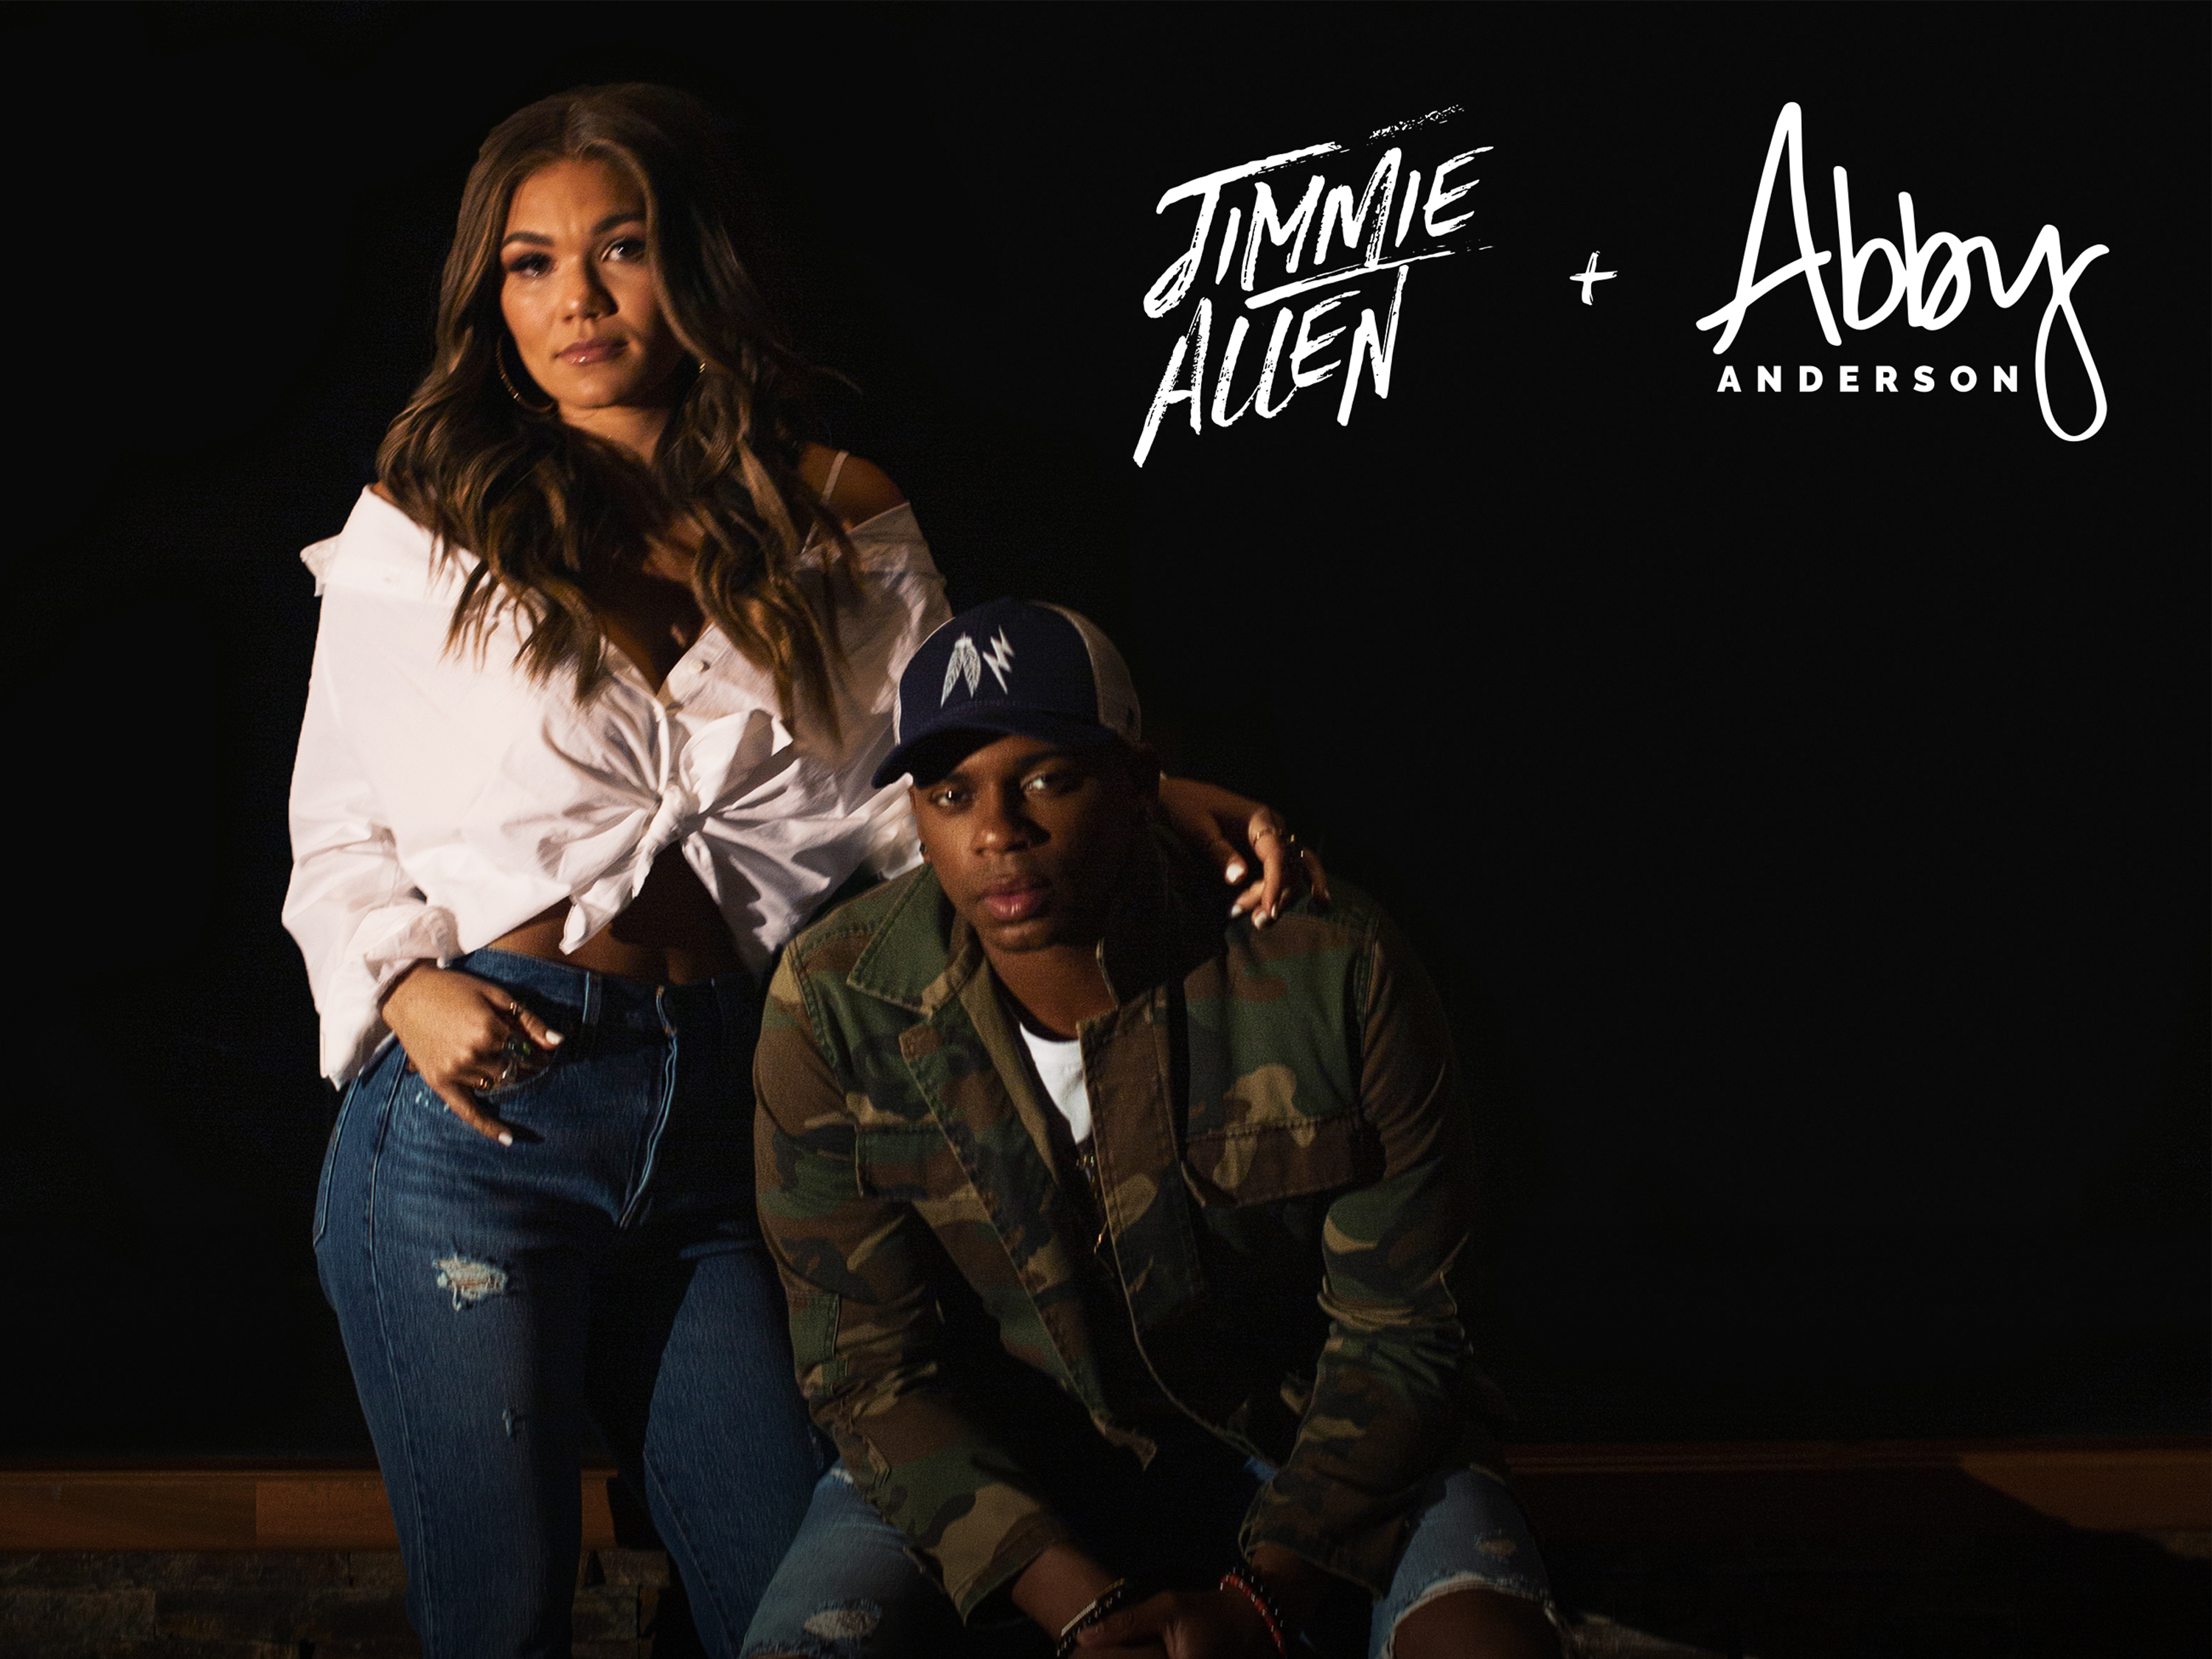 JIMMIE ALLEN AND ABBY ANDERSON RELEASE SULTRY COVER OF LADY GAGA